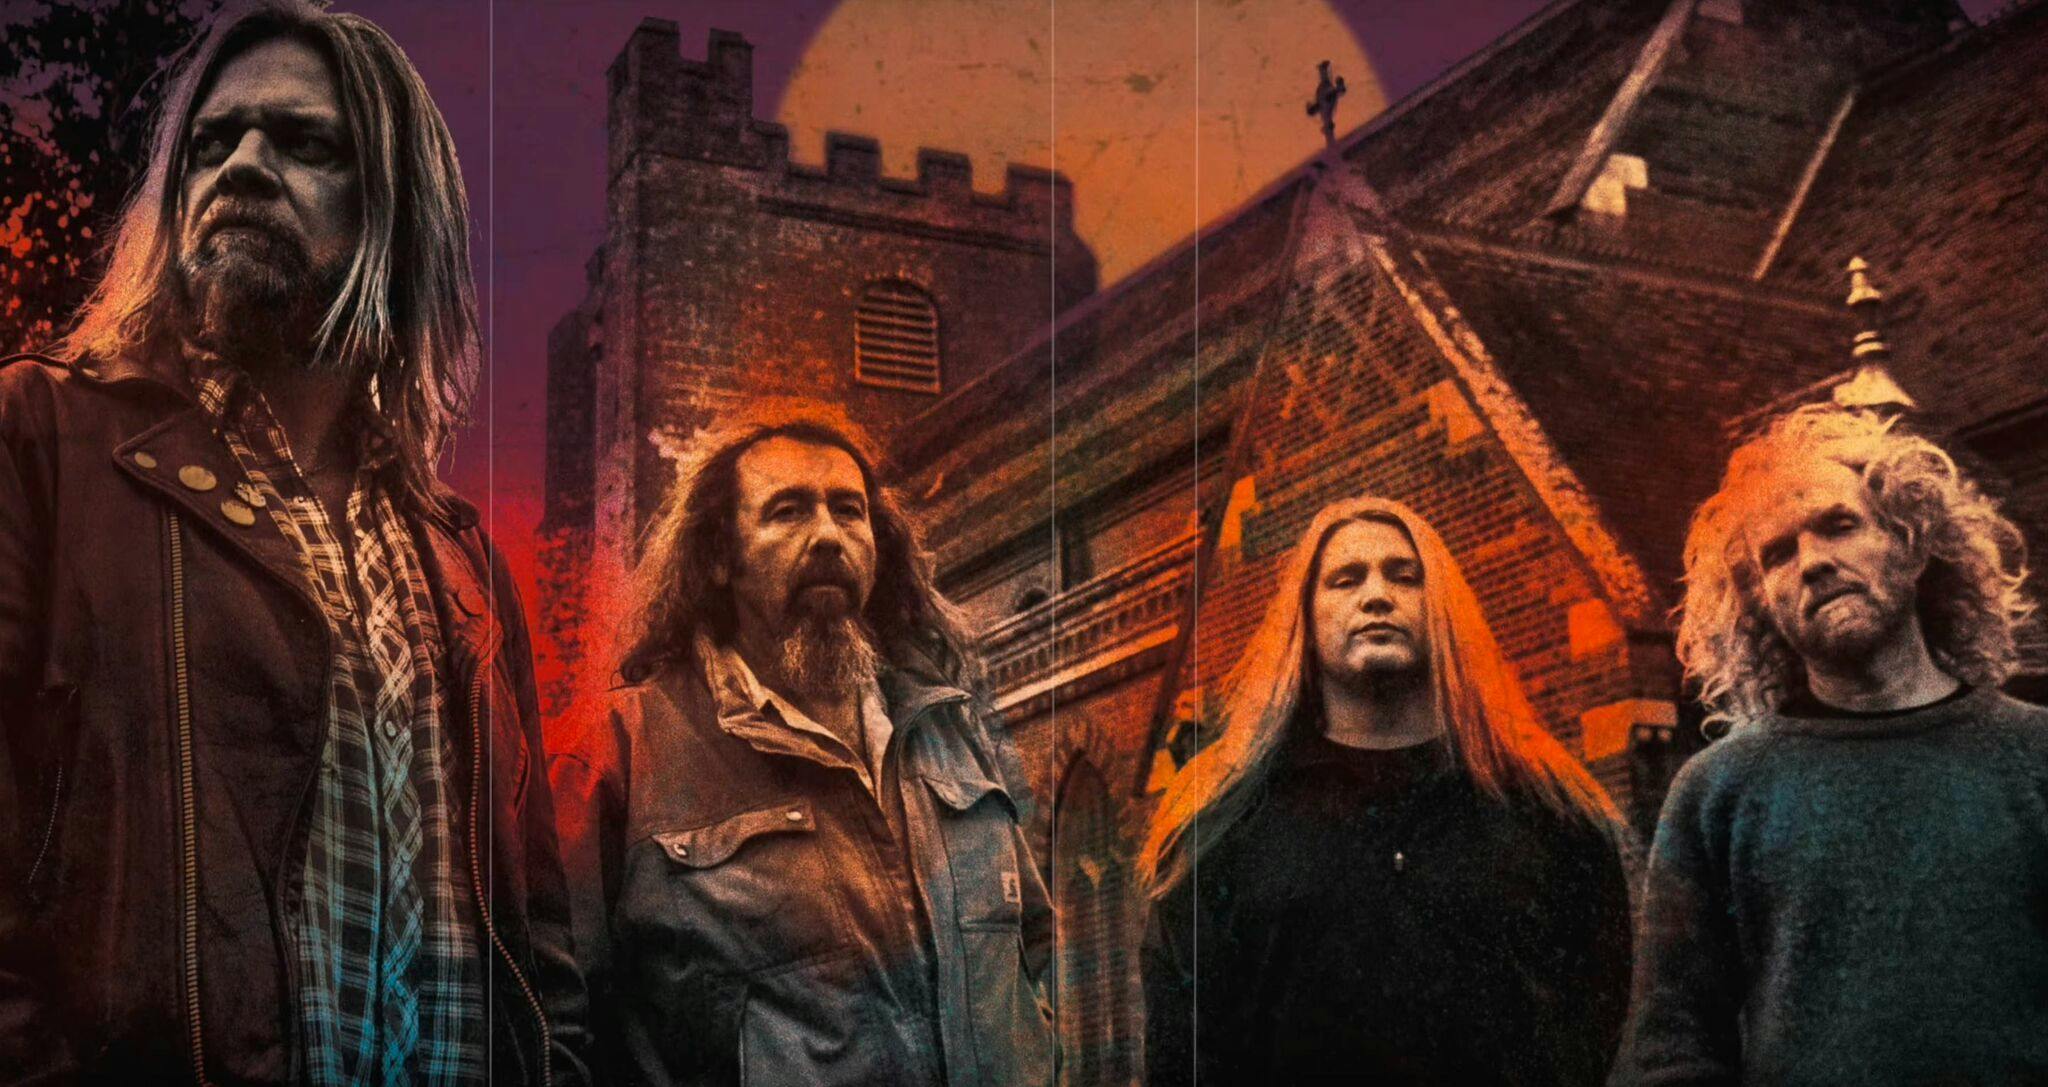 Corrosion Of Conformity Have Reunited With Pepper Keenan And Have A New Record Out In January